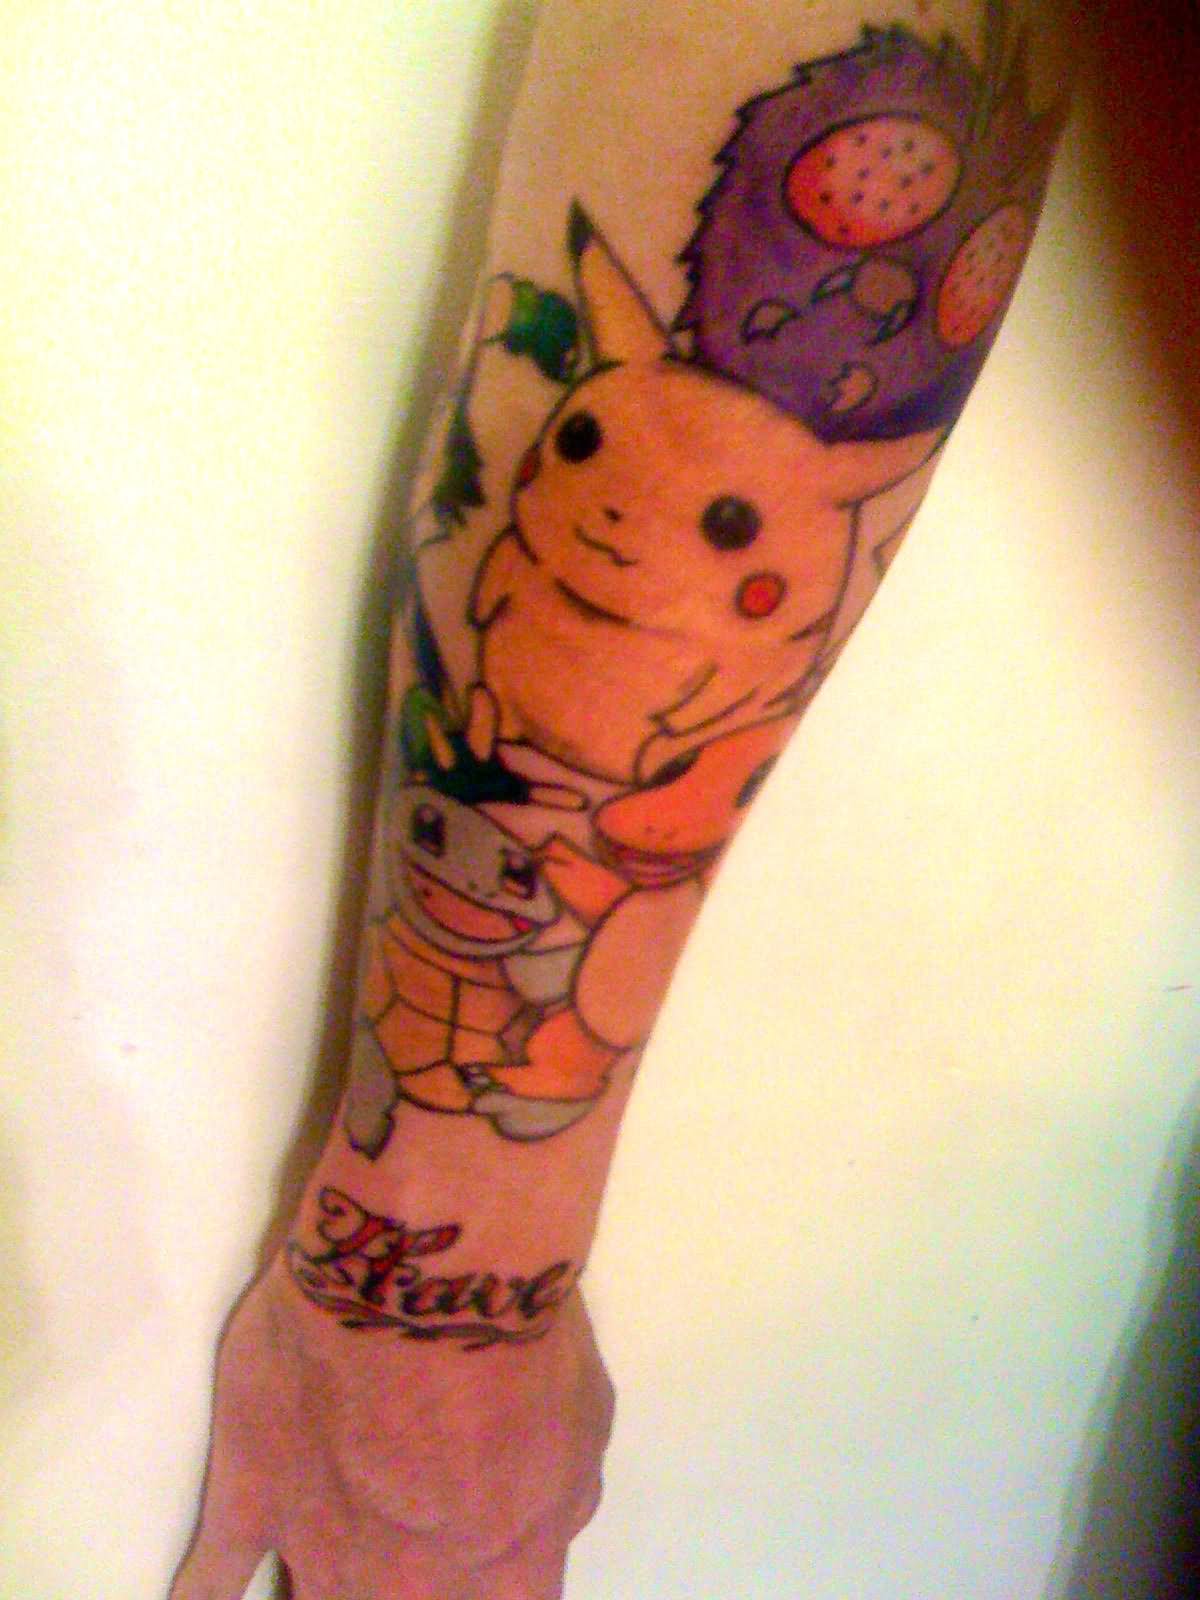 Pikachu And Squirtle Pokemons Tattoo On Sleeve